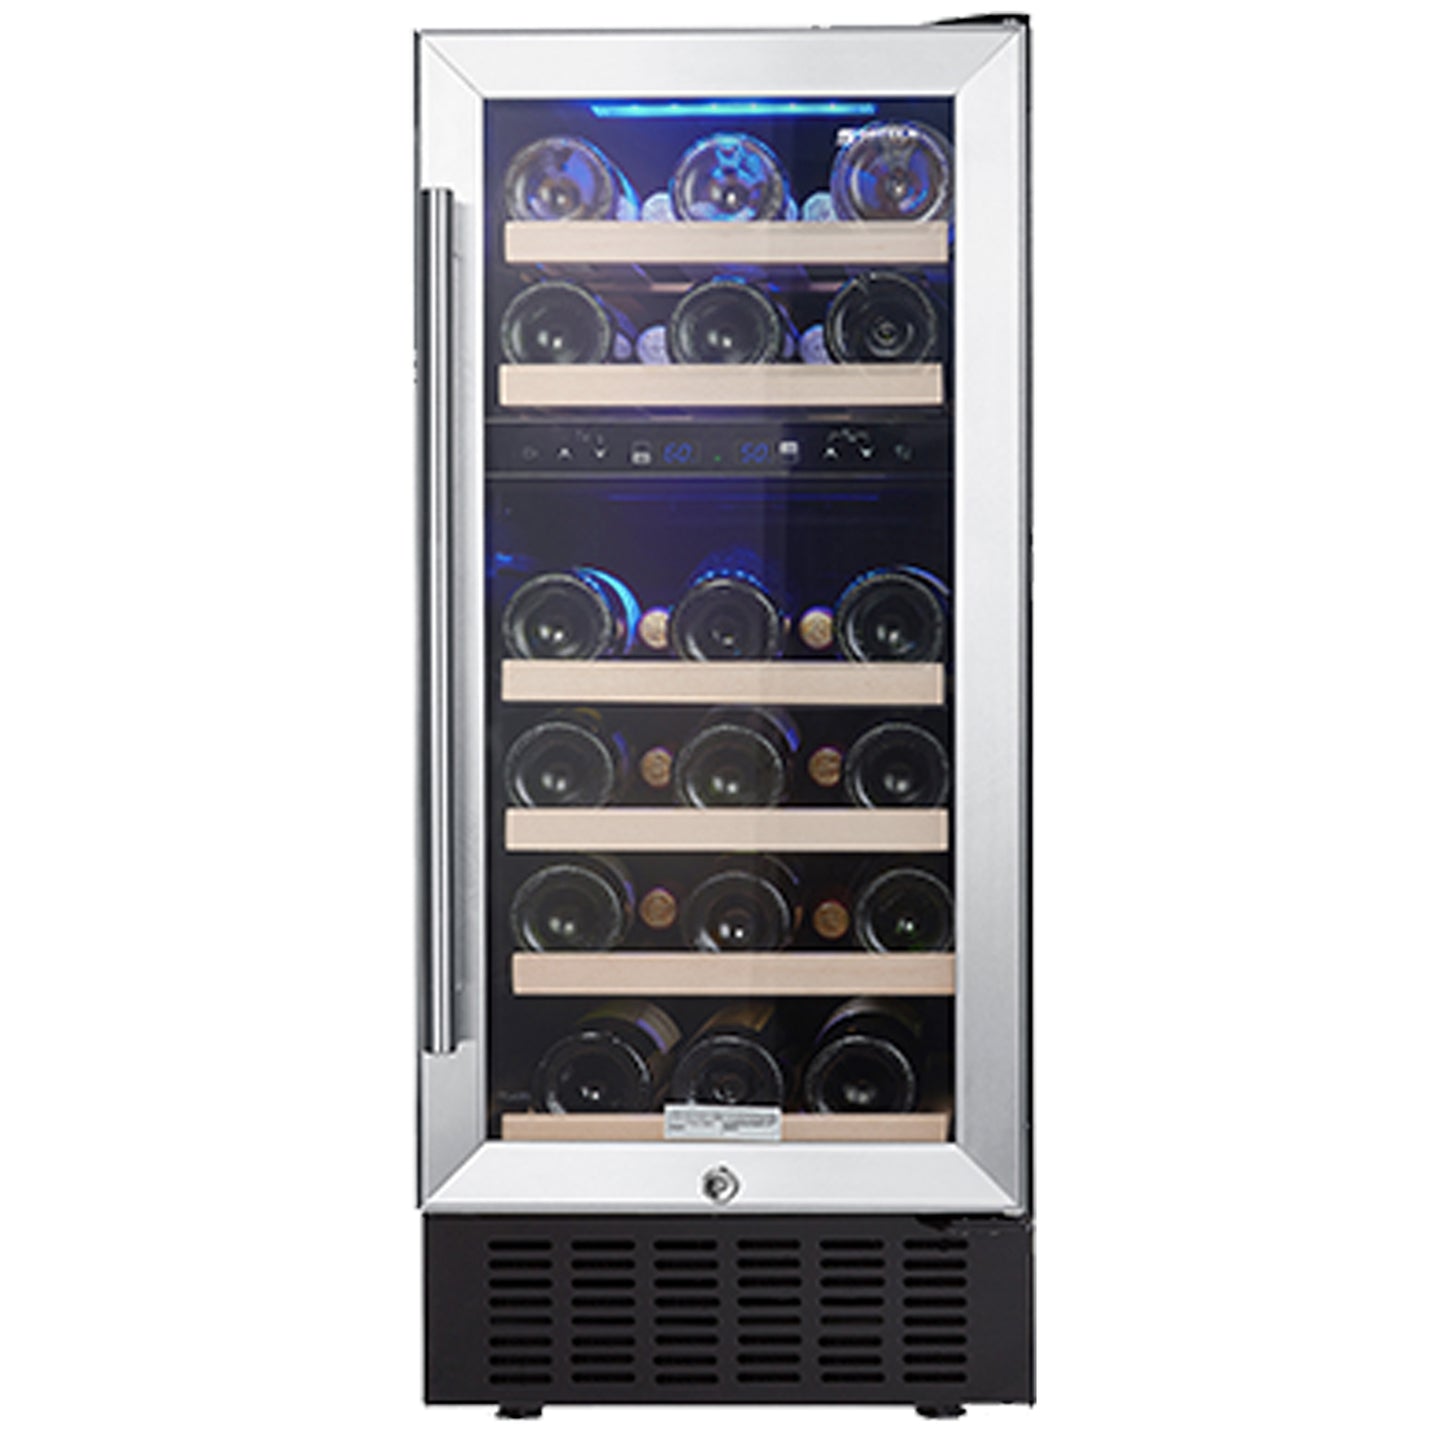 SOTOLA 15-Inch Dual Zone Wine Cooler Refrigerator with 28 Bottle Capacity